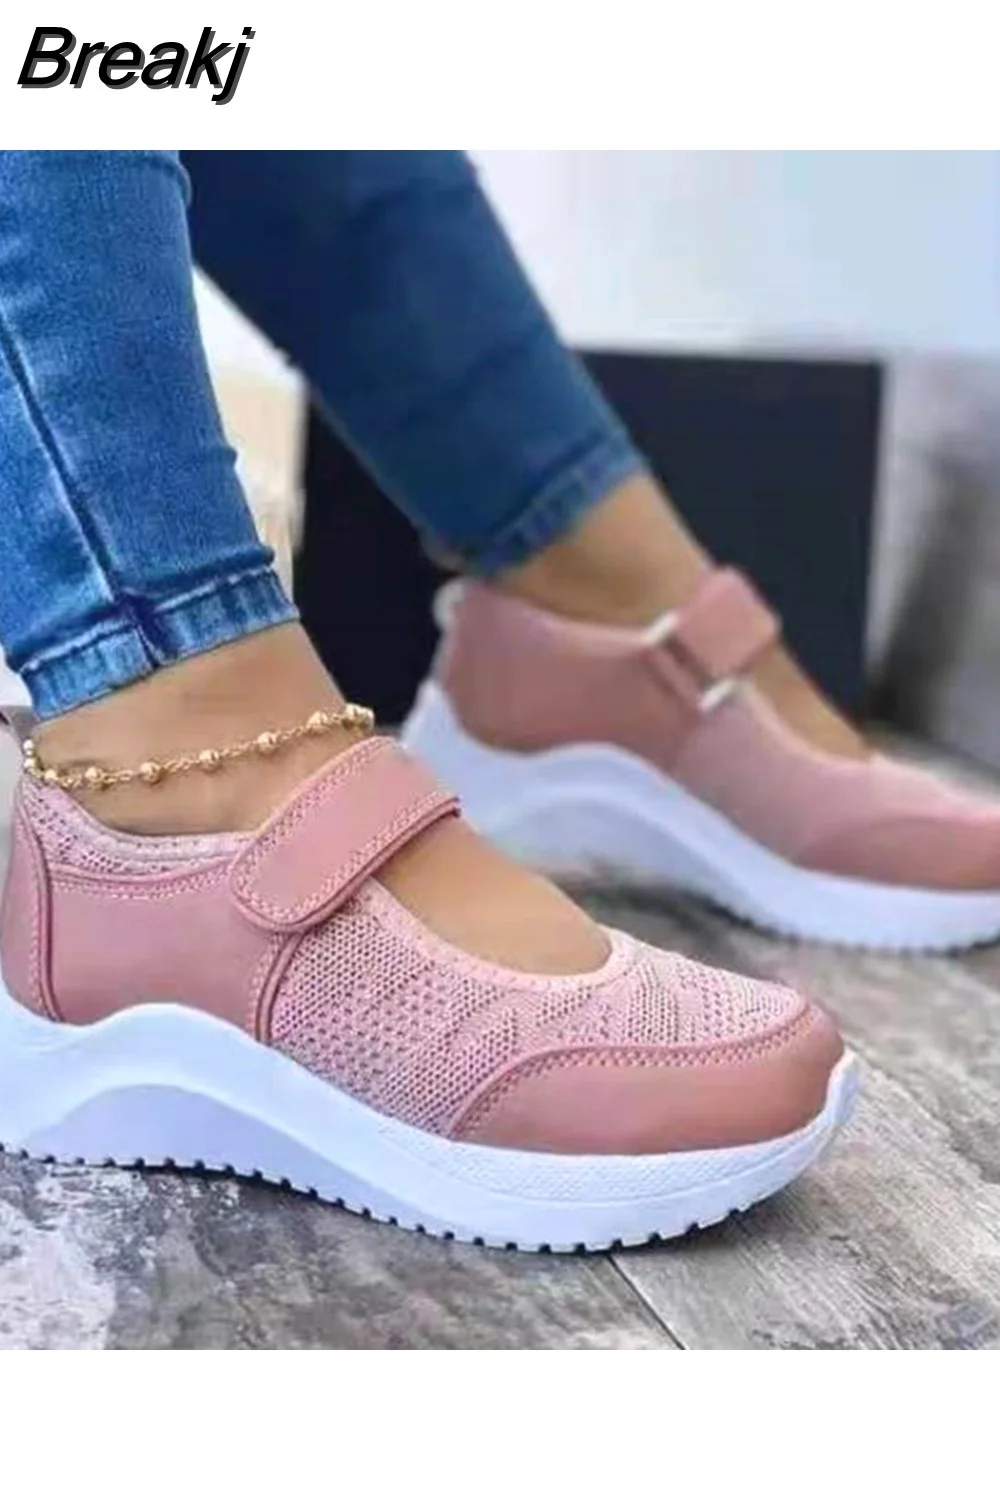 Breakj Women Thick soled Sneakers Women Fashion Mesh Breathable Wedge sneakers Shoes Ladies Casual Sport Shoes Zapatillas Mujer